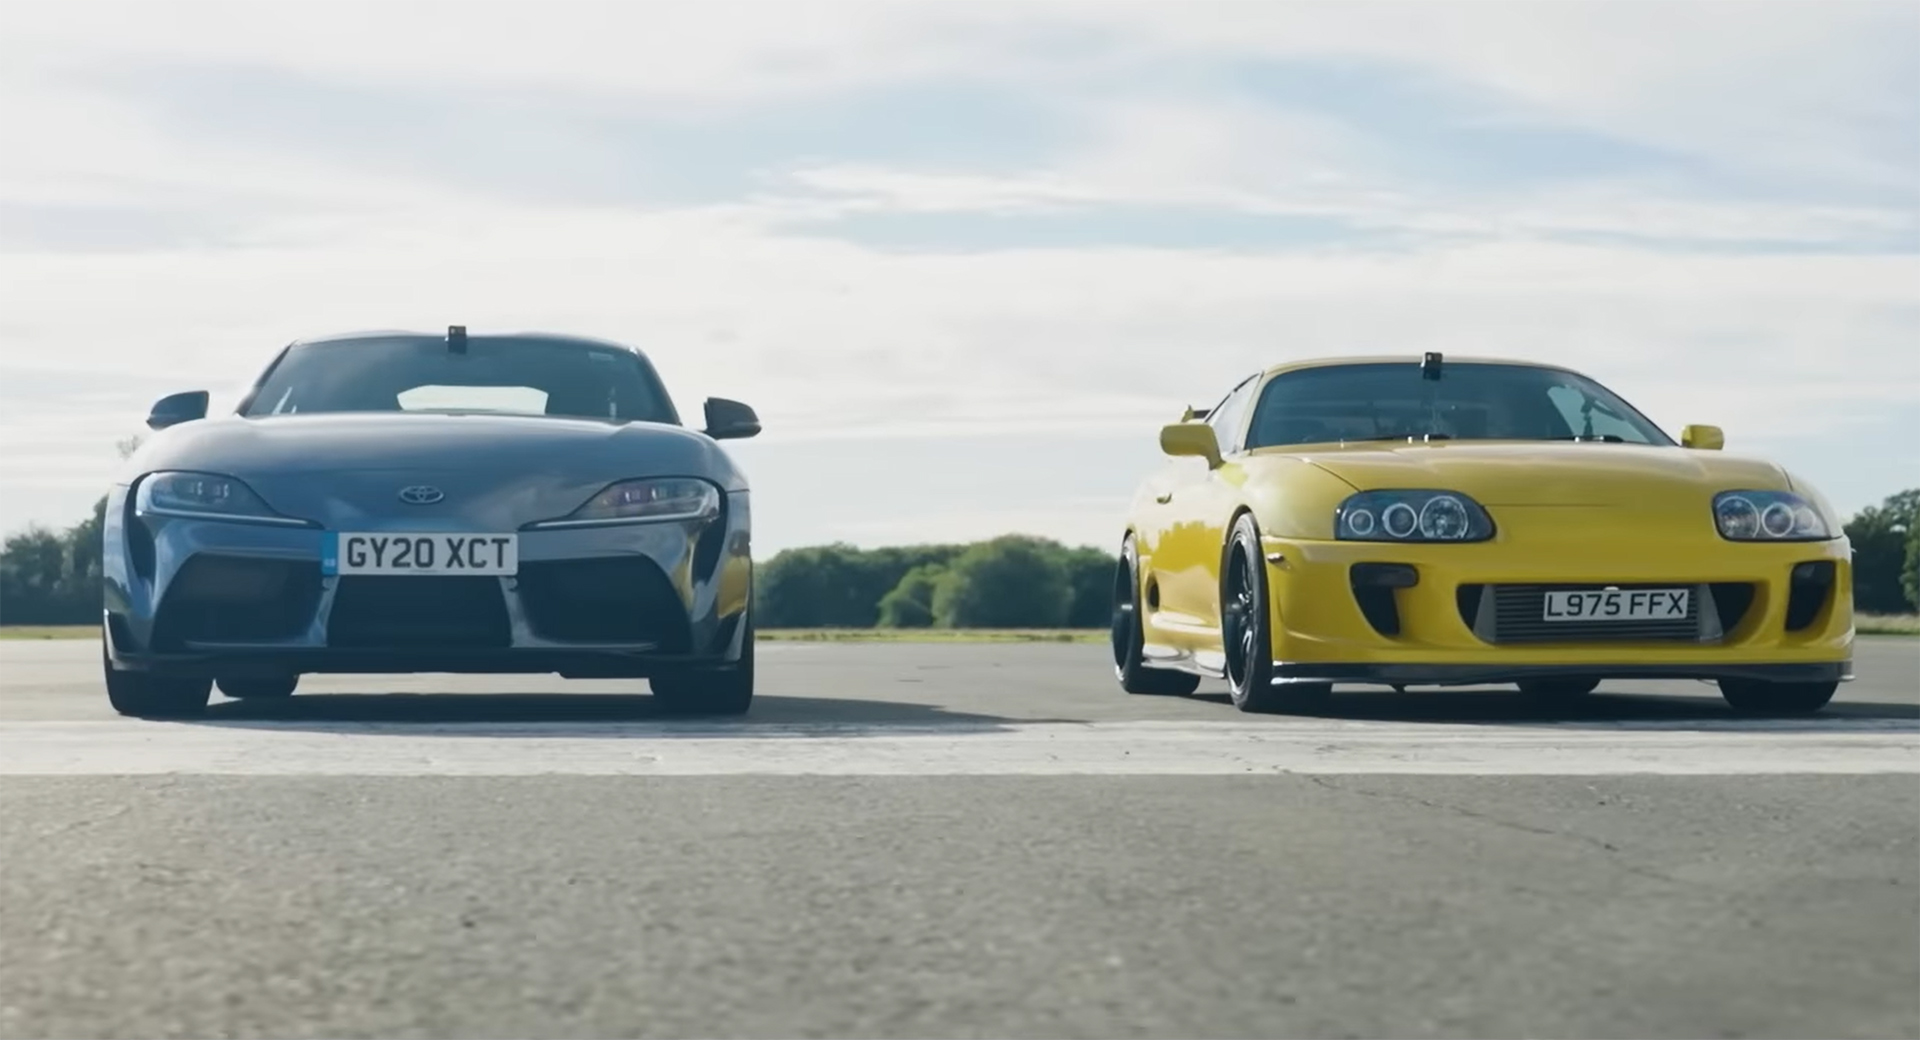 Stock Mk5 Toyota Supra Vs Modified Mk4 Is An Unfair Comparison With  Surprising Results